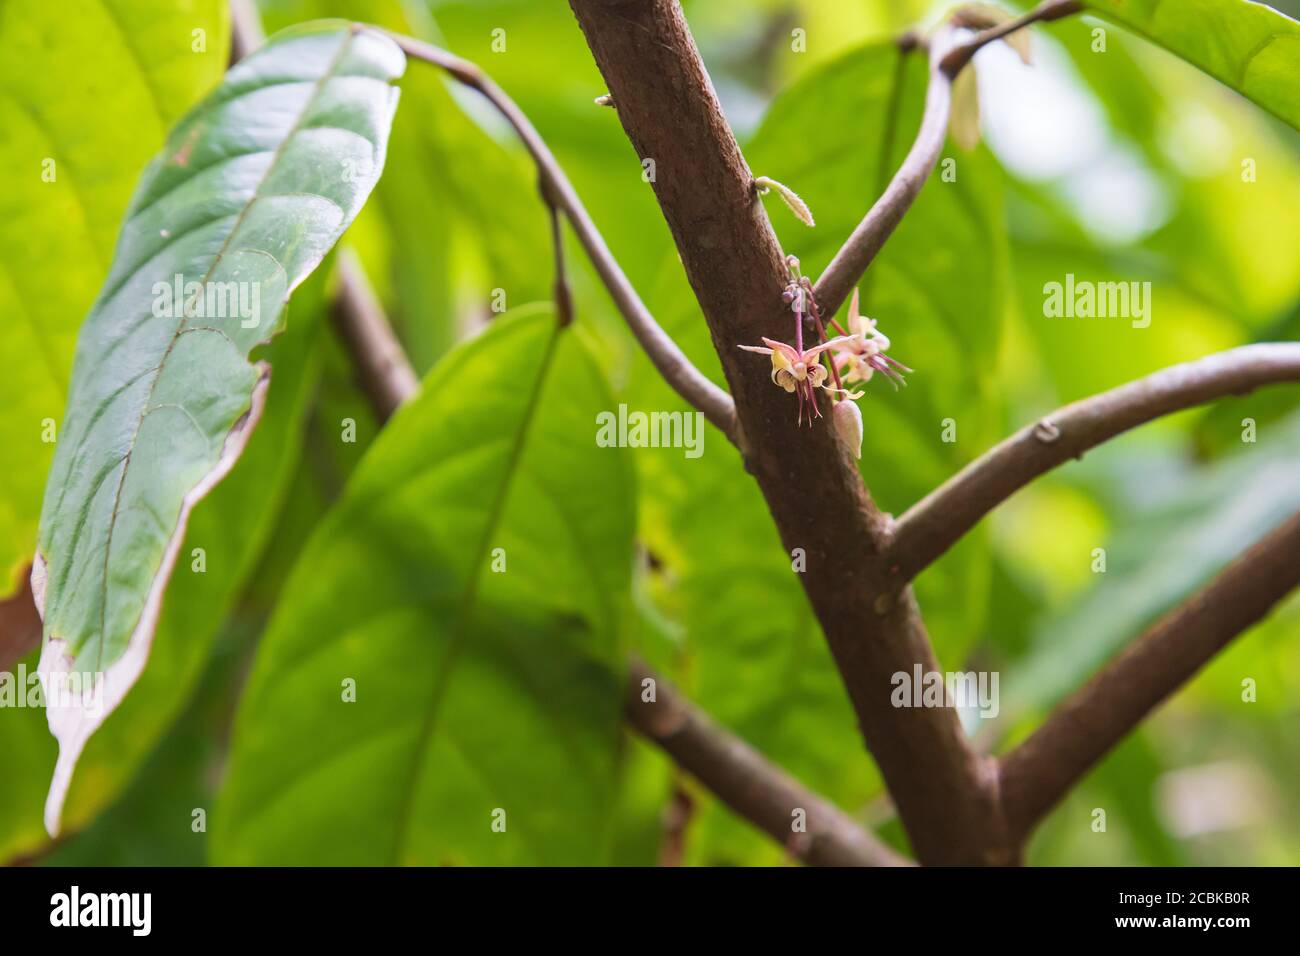 A flower buds on a cocoa tree, a rarely seen sight Stock Photo